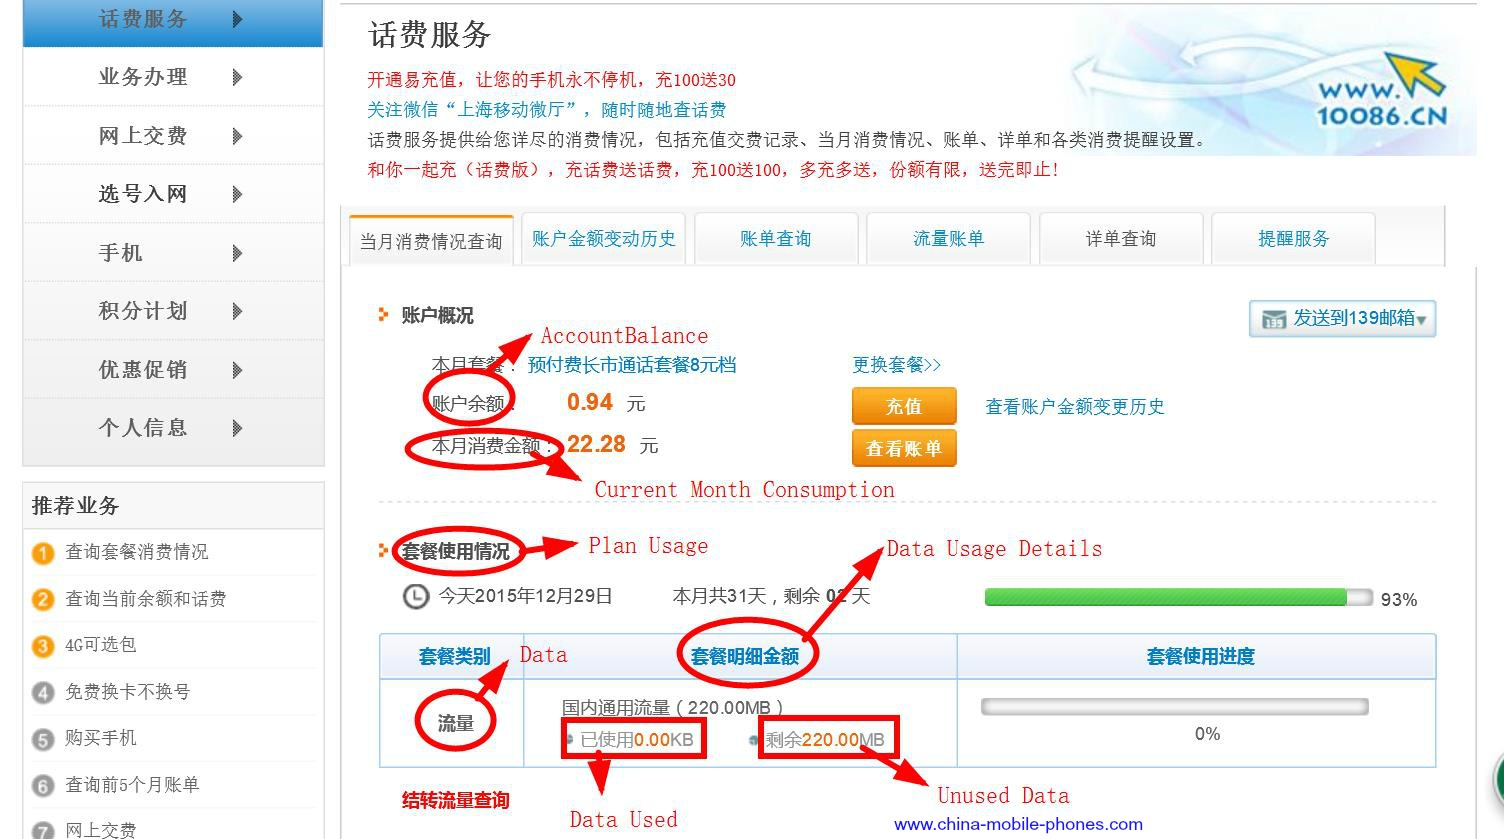 China Mobile Data and Call Usage Details